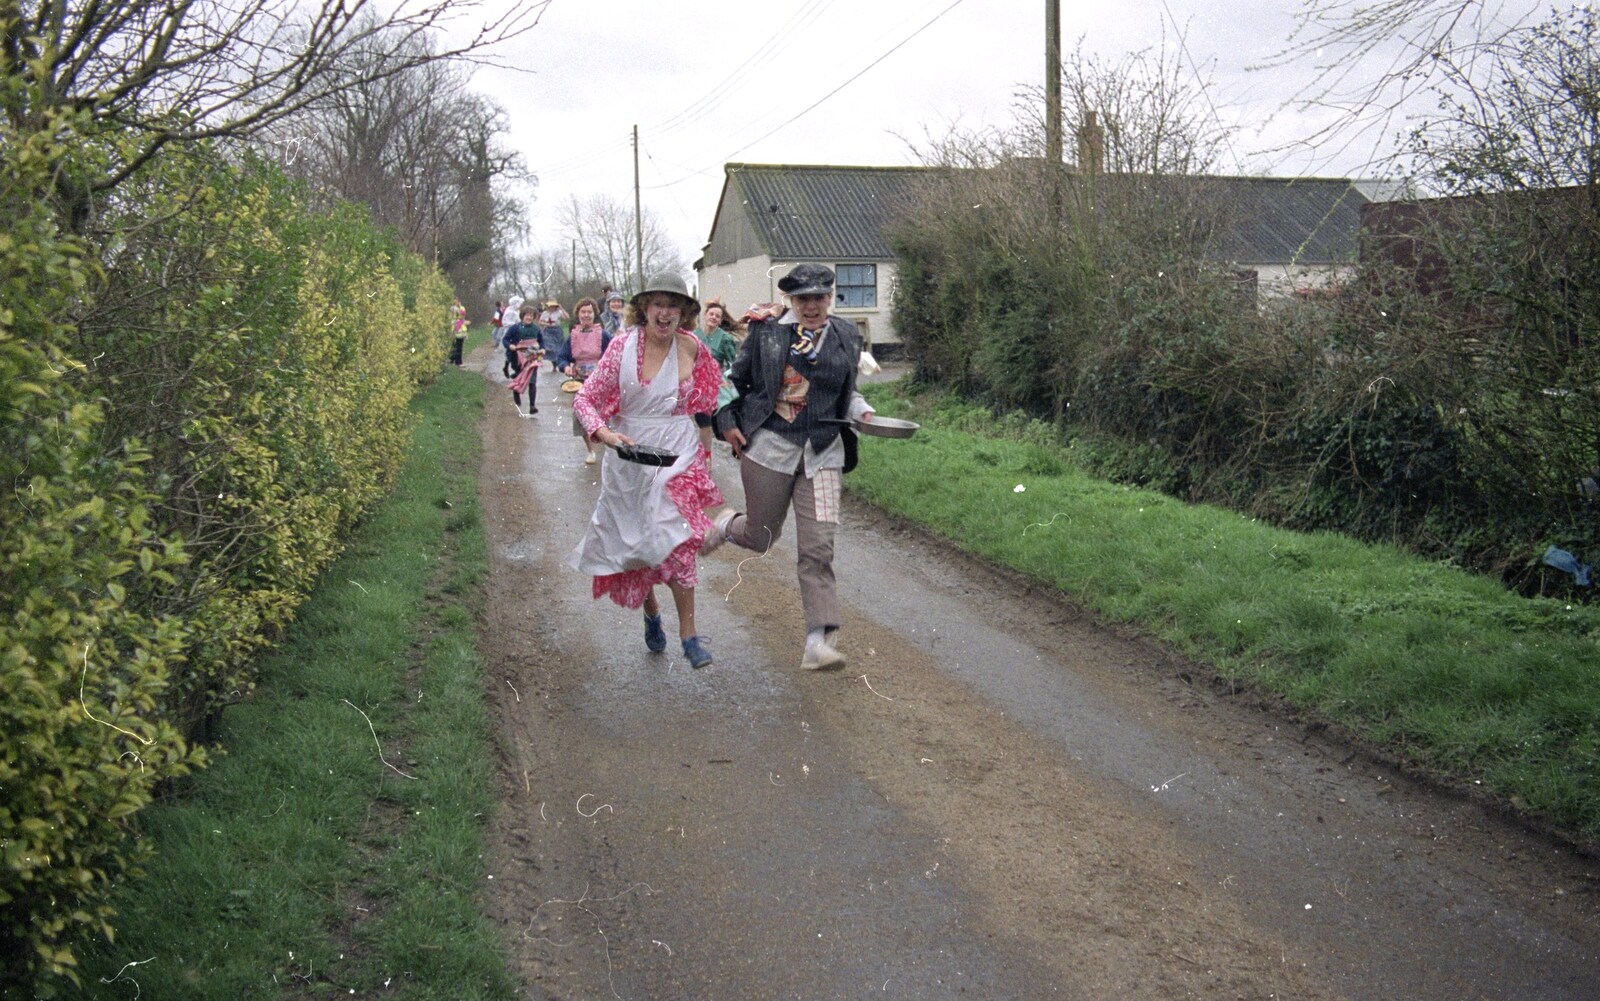 Elteb and Kim Archer run for it from Pancake Day in Starston, Norfolk - 27th February 1990